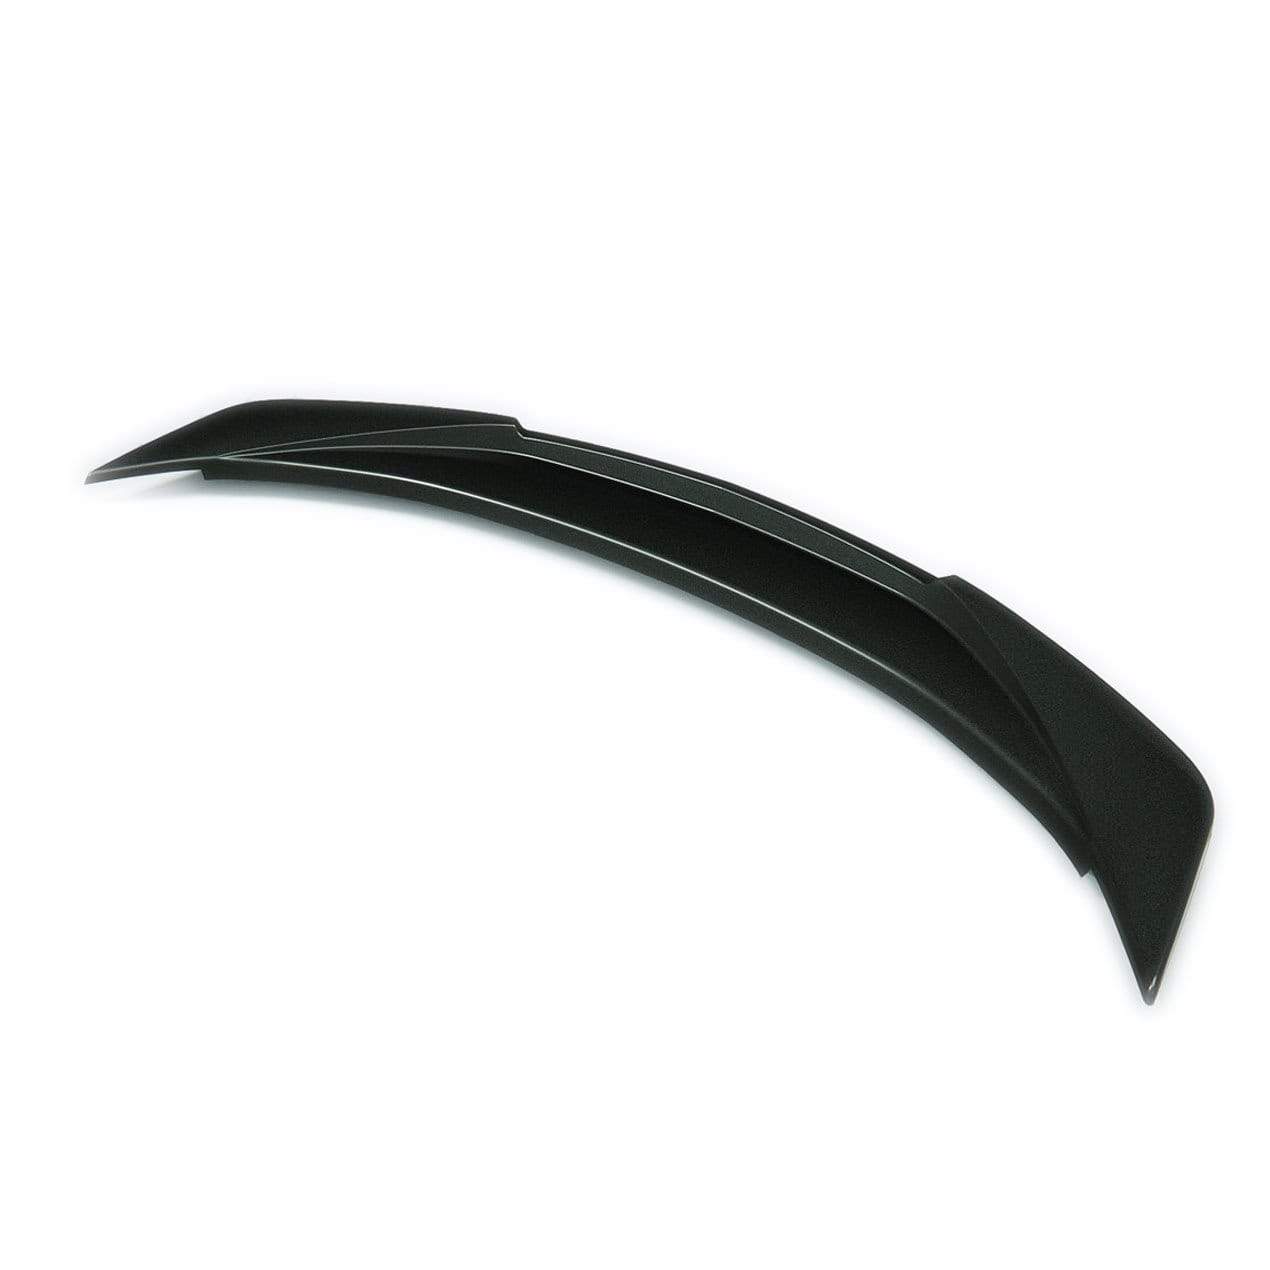 ACS Composite Rear Deck Spoiler for Camaro V6 & I4 [48-4-015|48-4-103]PRM - Enhances down-force and complements the sophisticated lines of 6th gen Camaro.